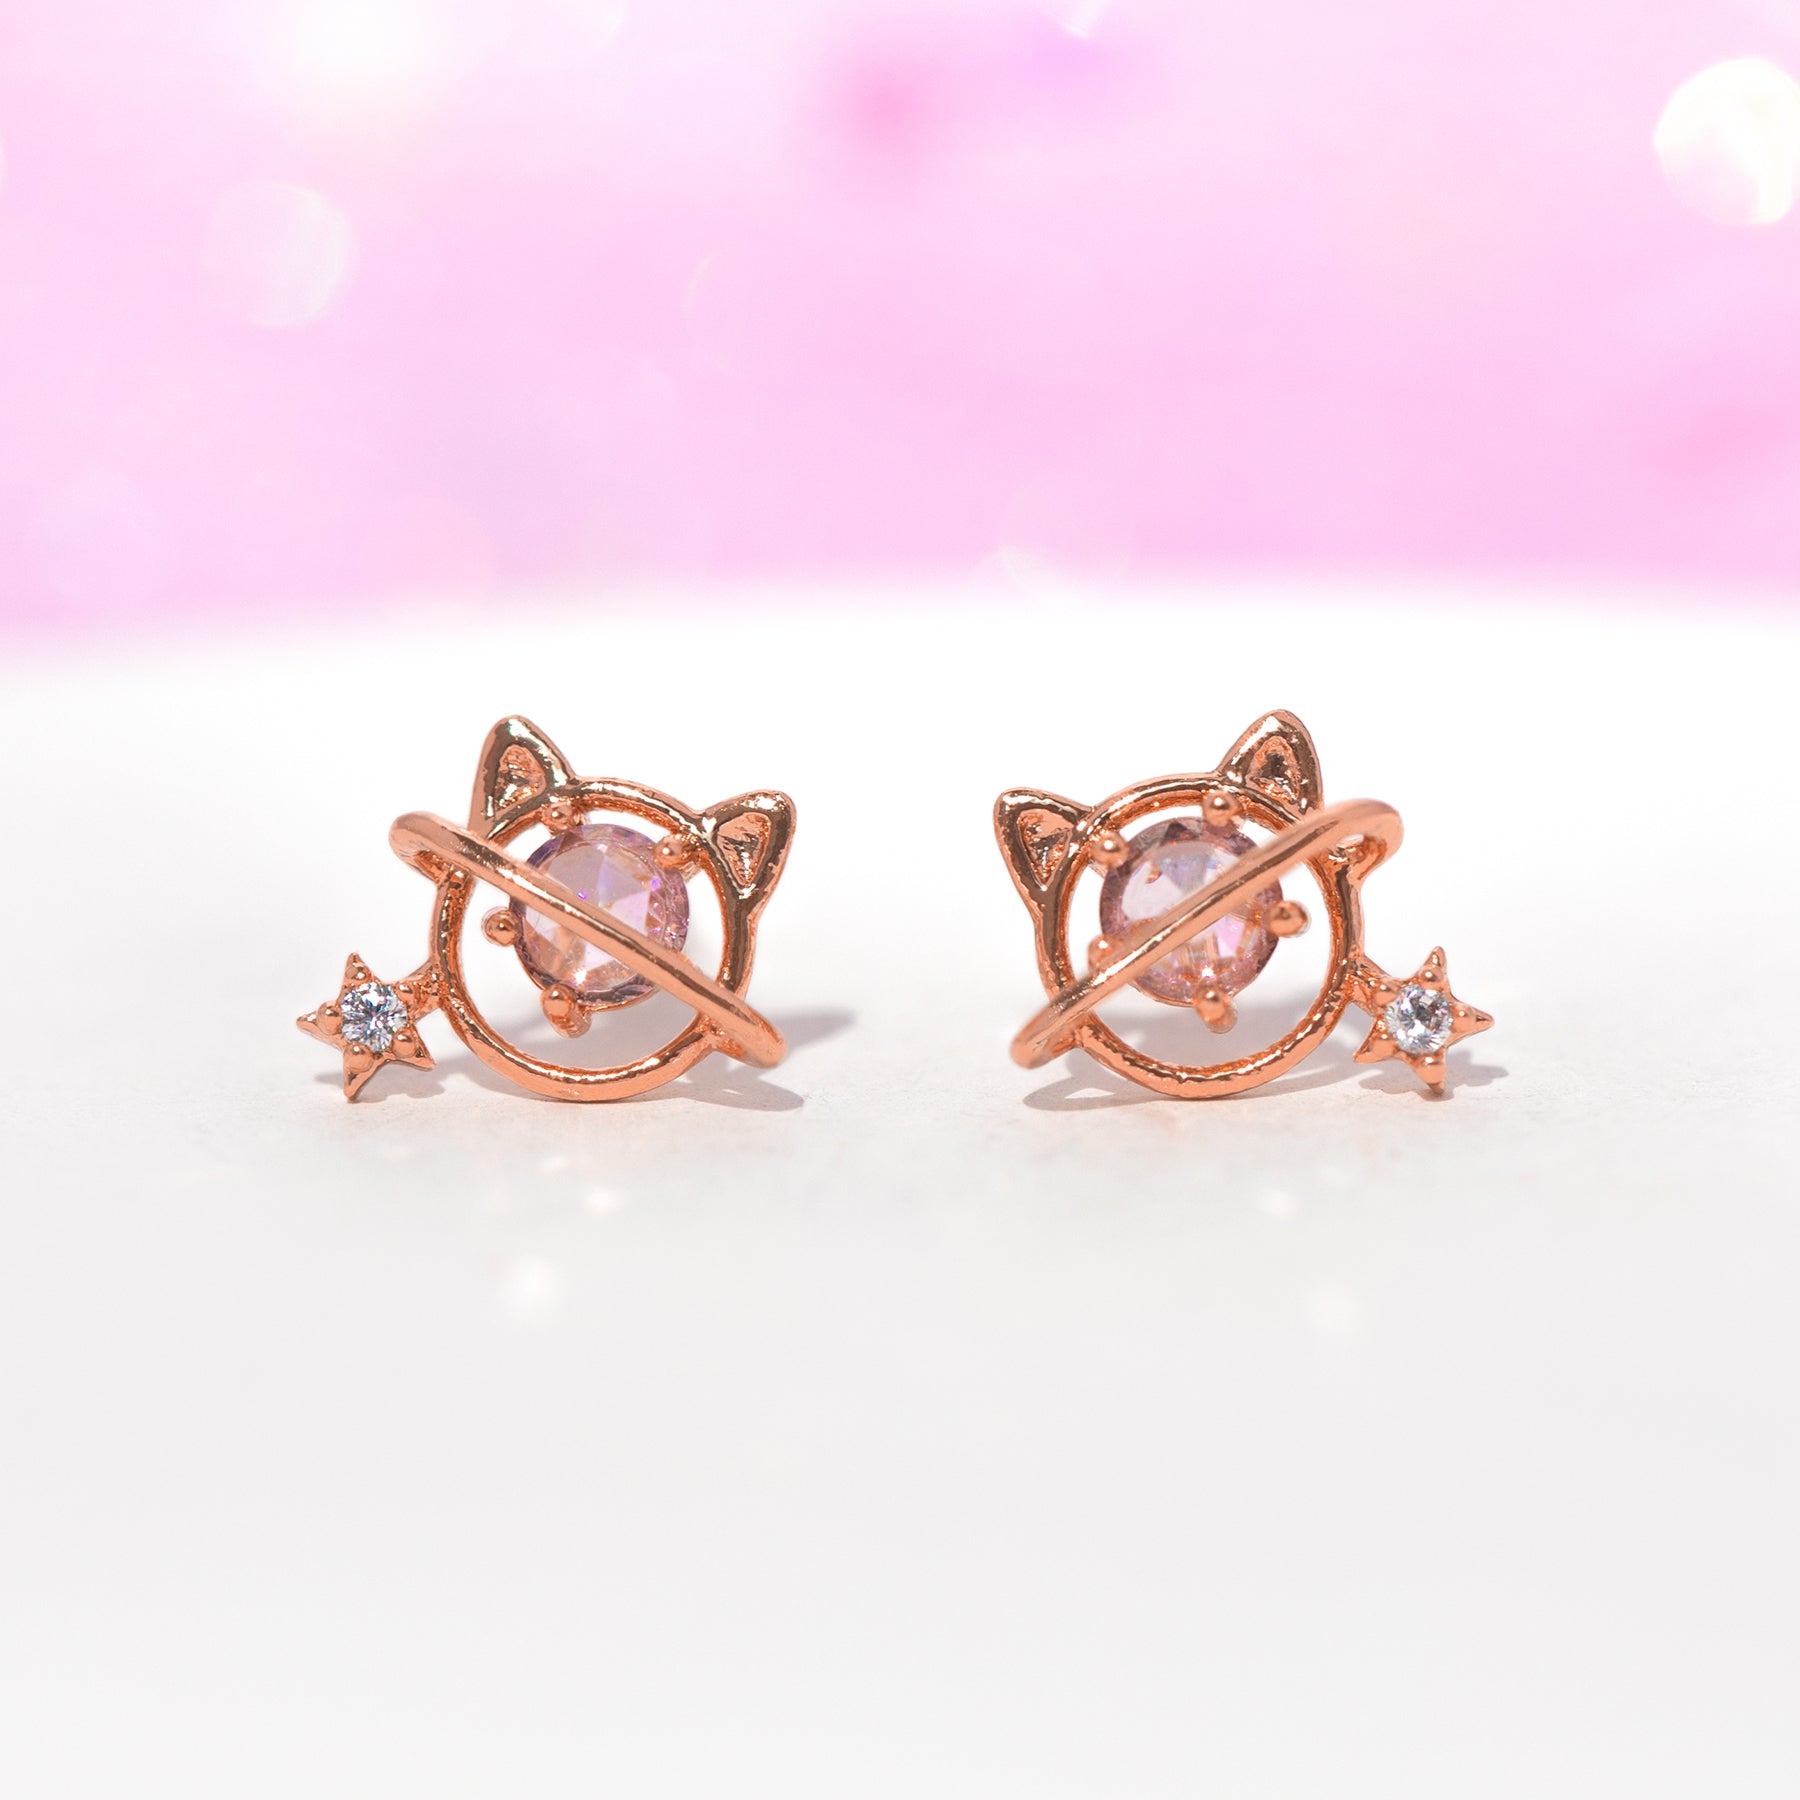 Purrty Planet Studs